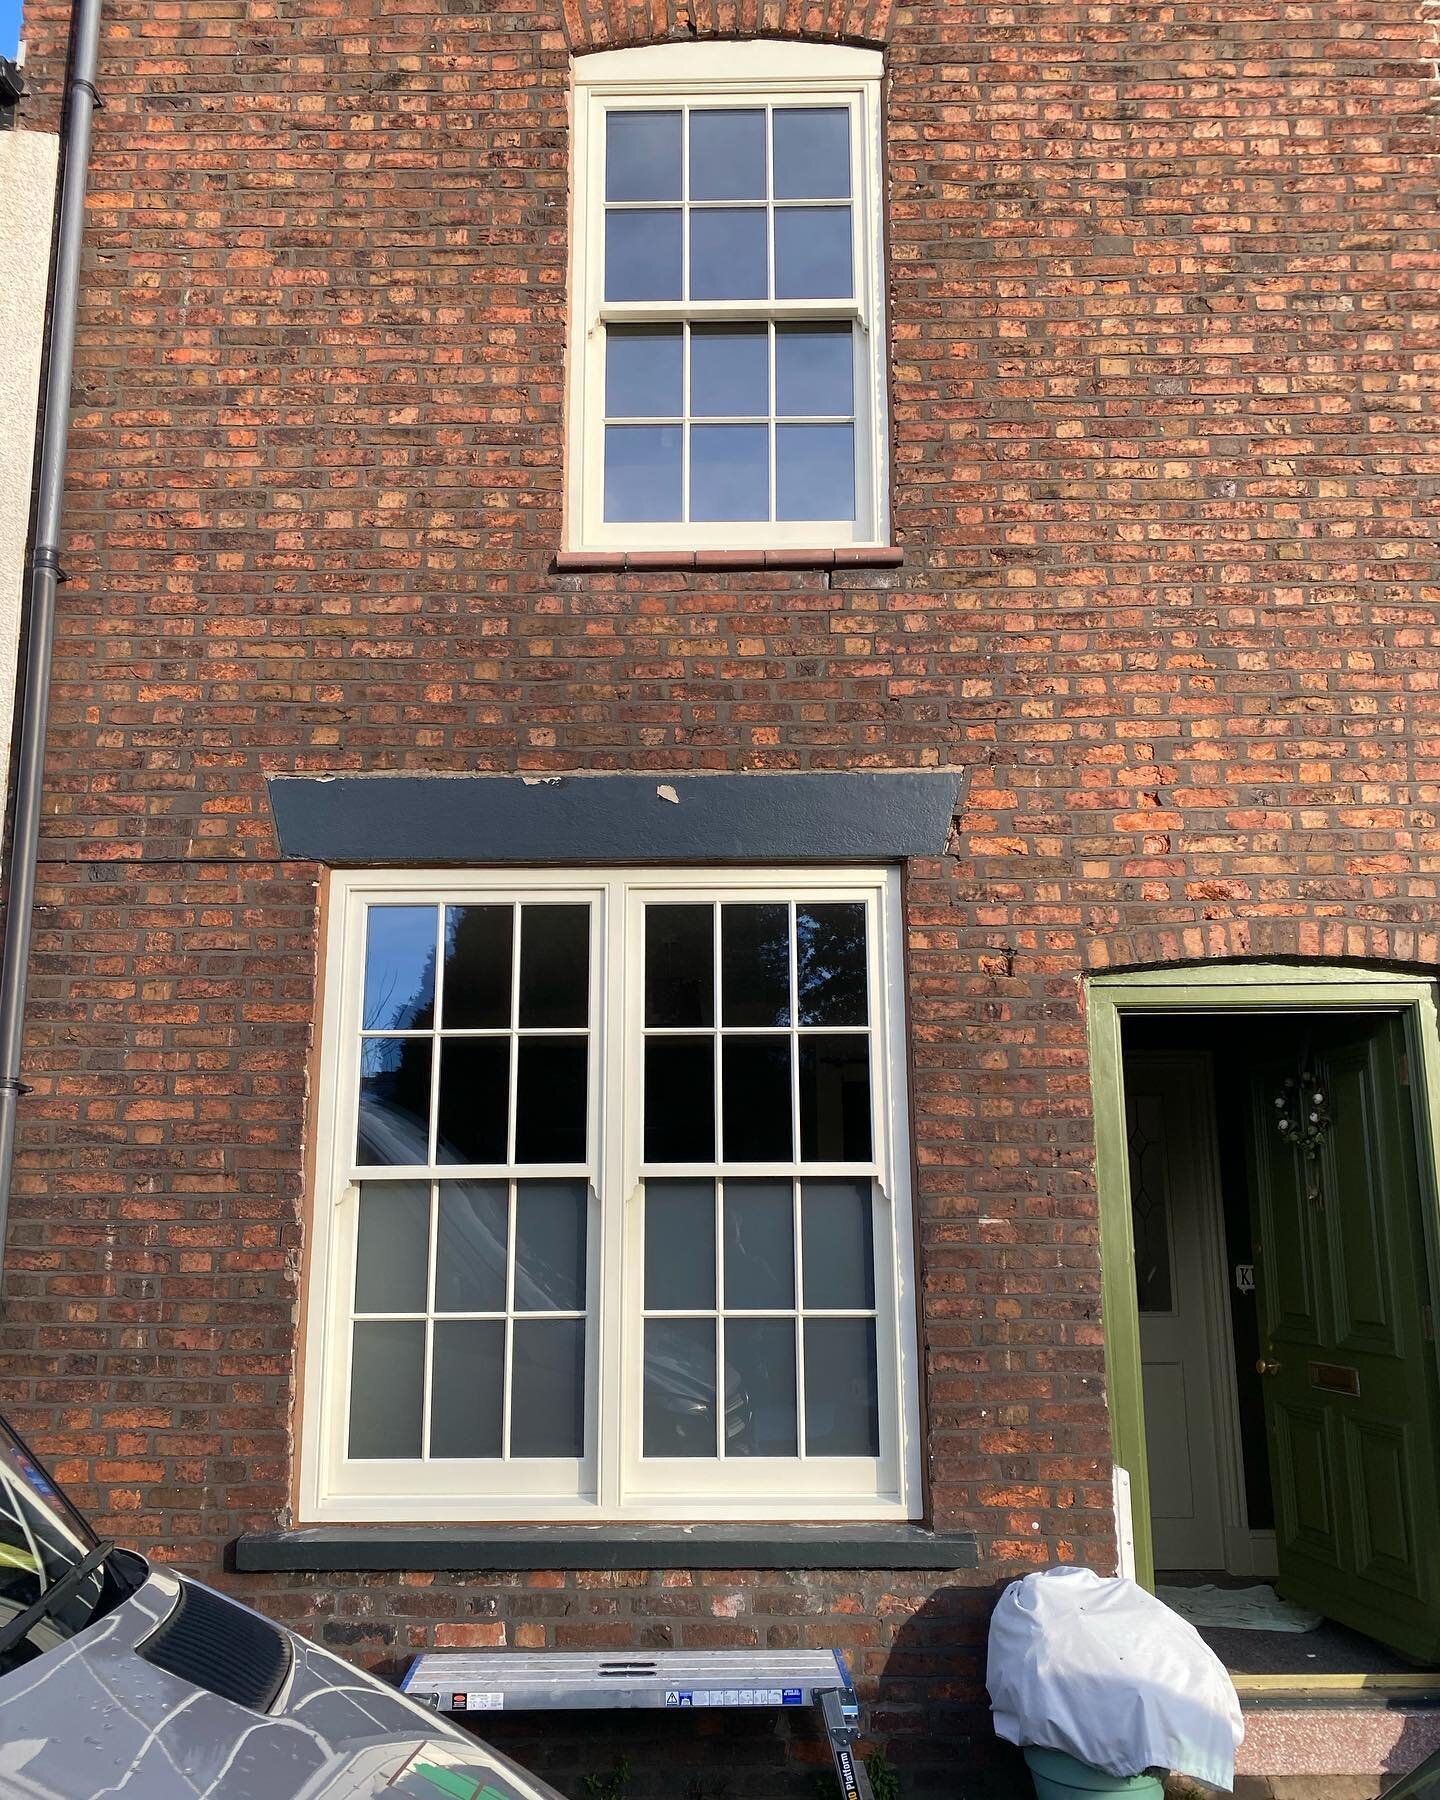 Accoya wood Conservation sash windows installed in Croston over the past couple of days. Finished in @ankerstuy_coatings_uk Antique White with antique brass furniture. The ground floor window has satin glass in the lower panes for privacy. 
&bull;
&b